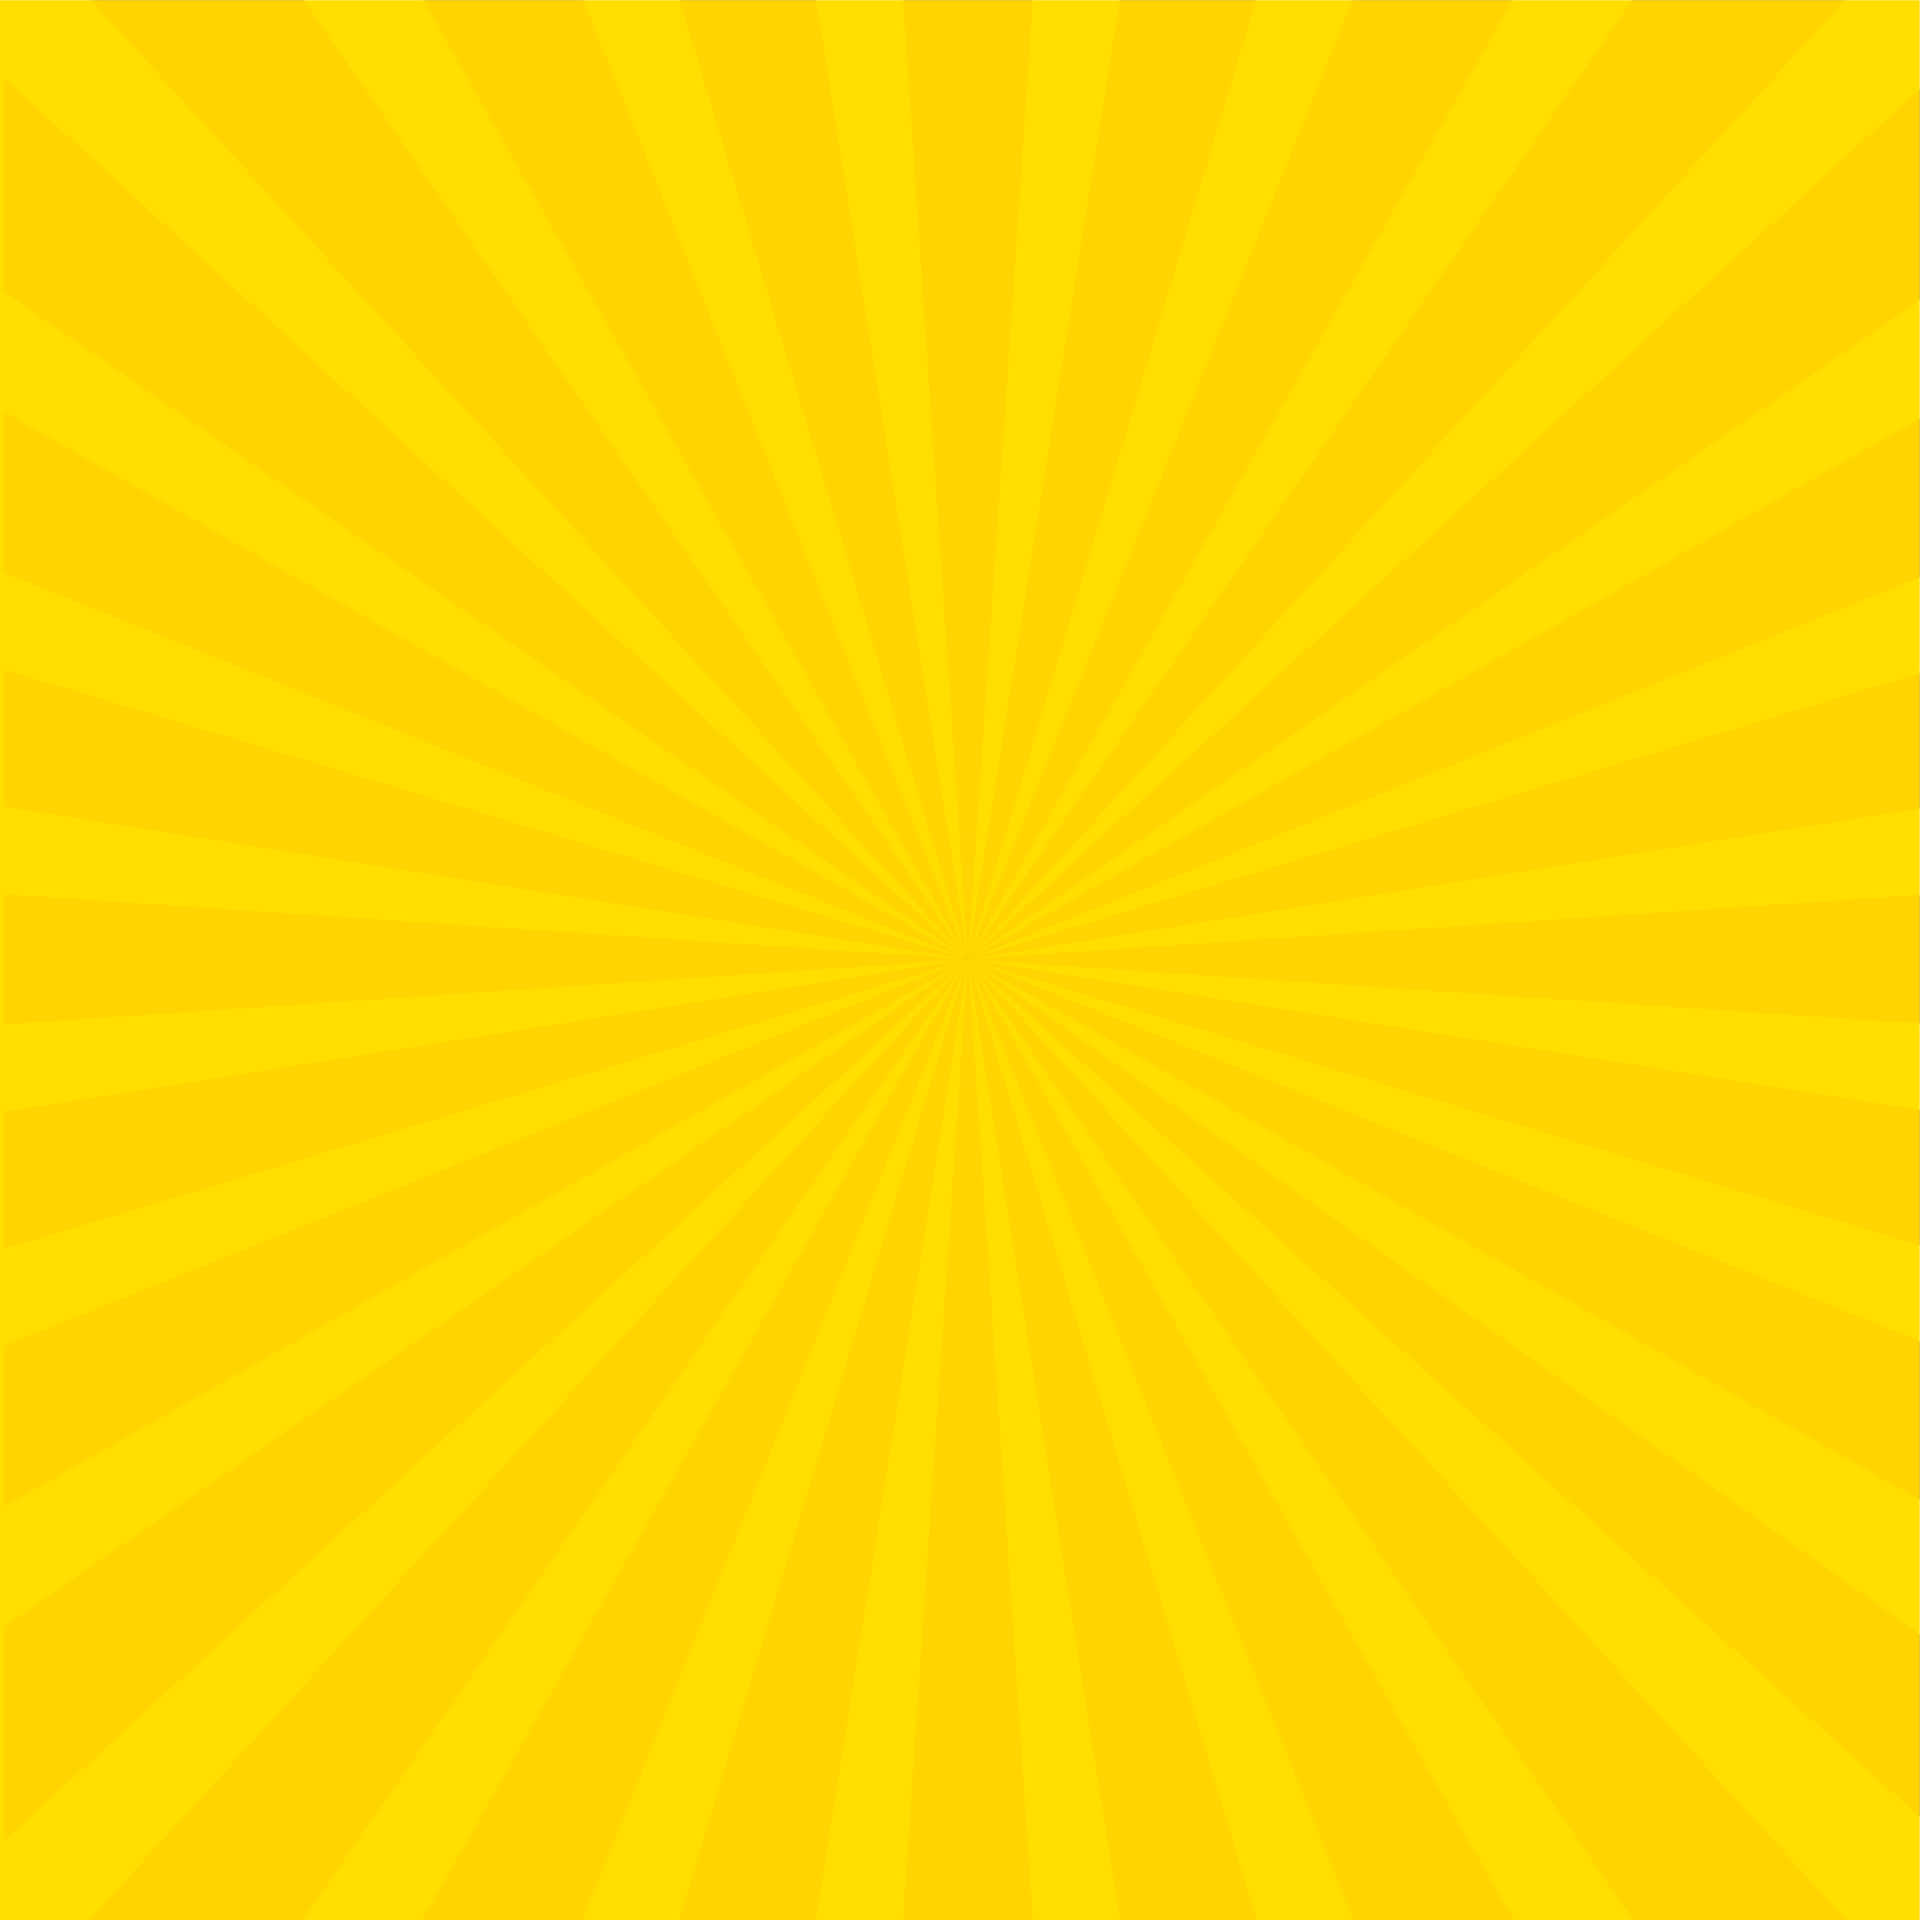 Bright and cheerful solid yellow background Wallpaper